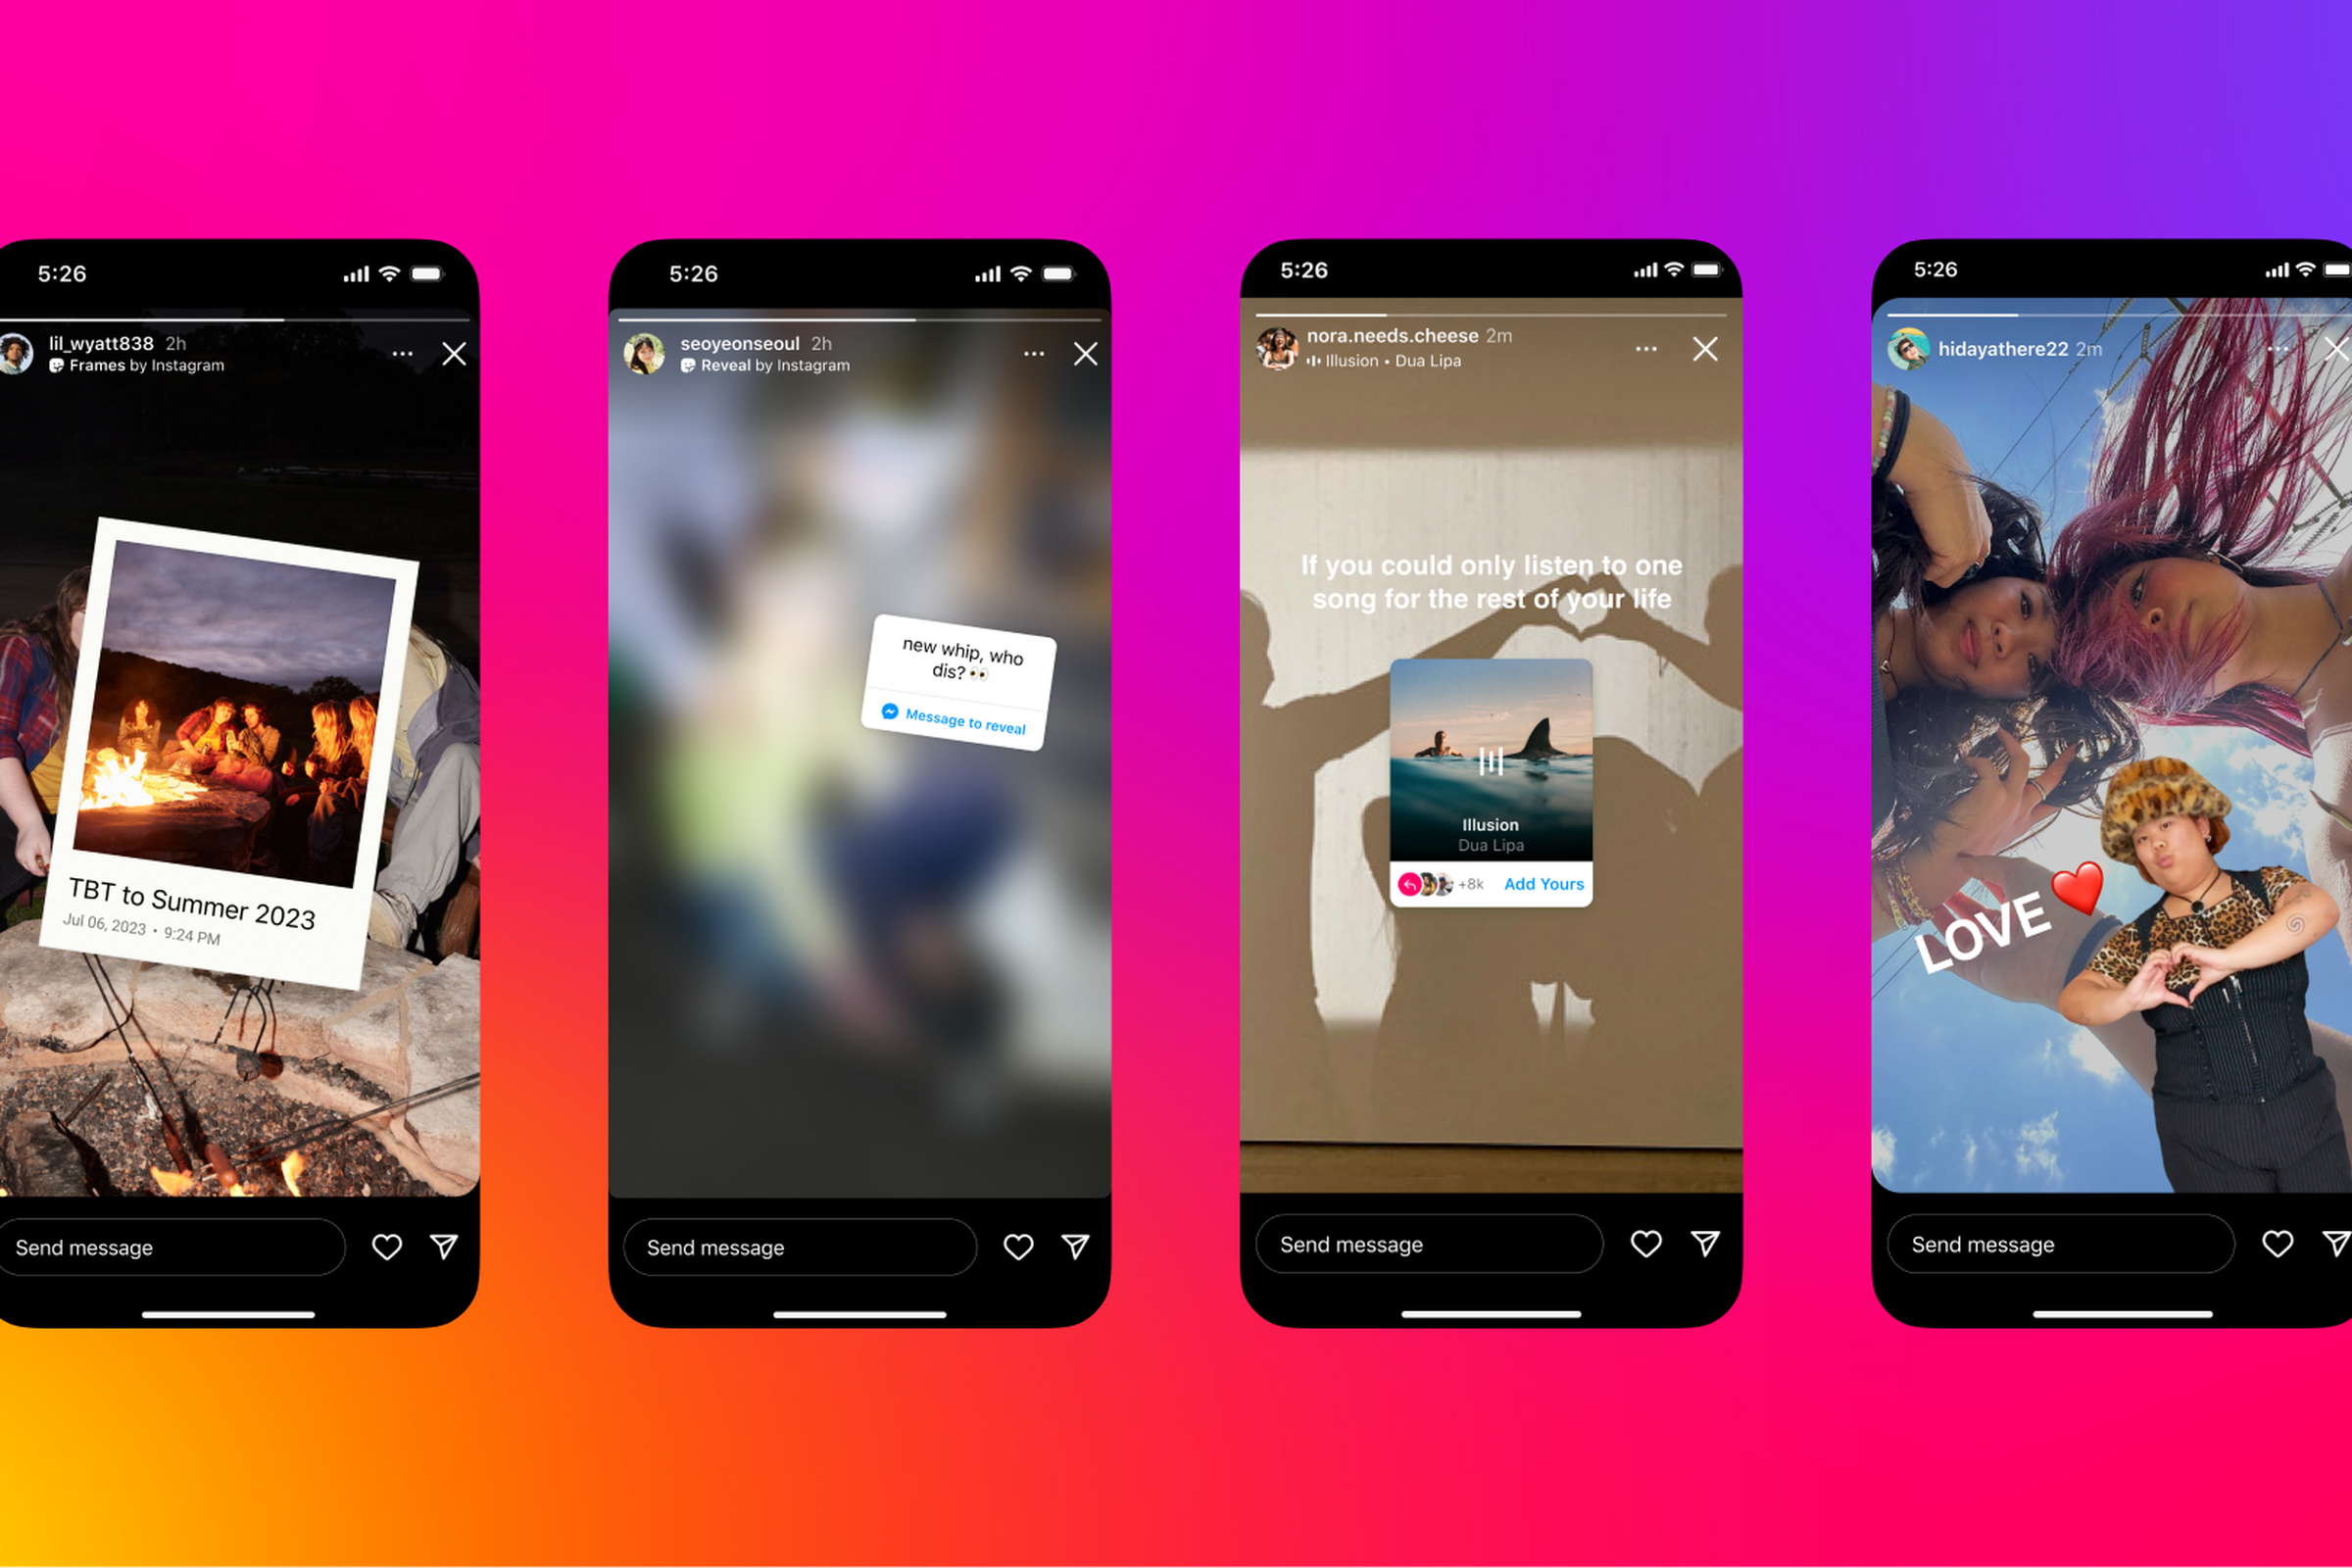 Instagram stickers featuring new photo frames, a blurring effect, and music sharing features.